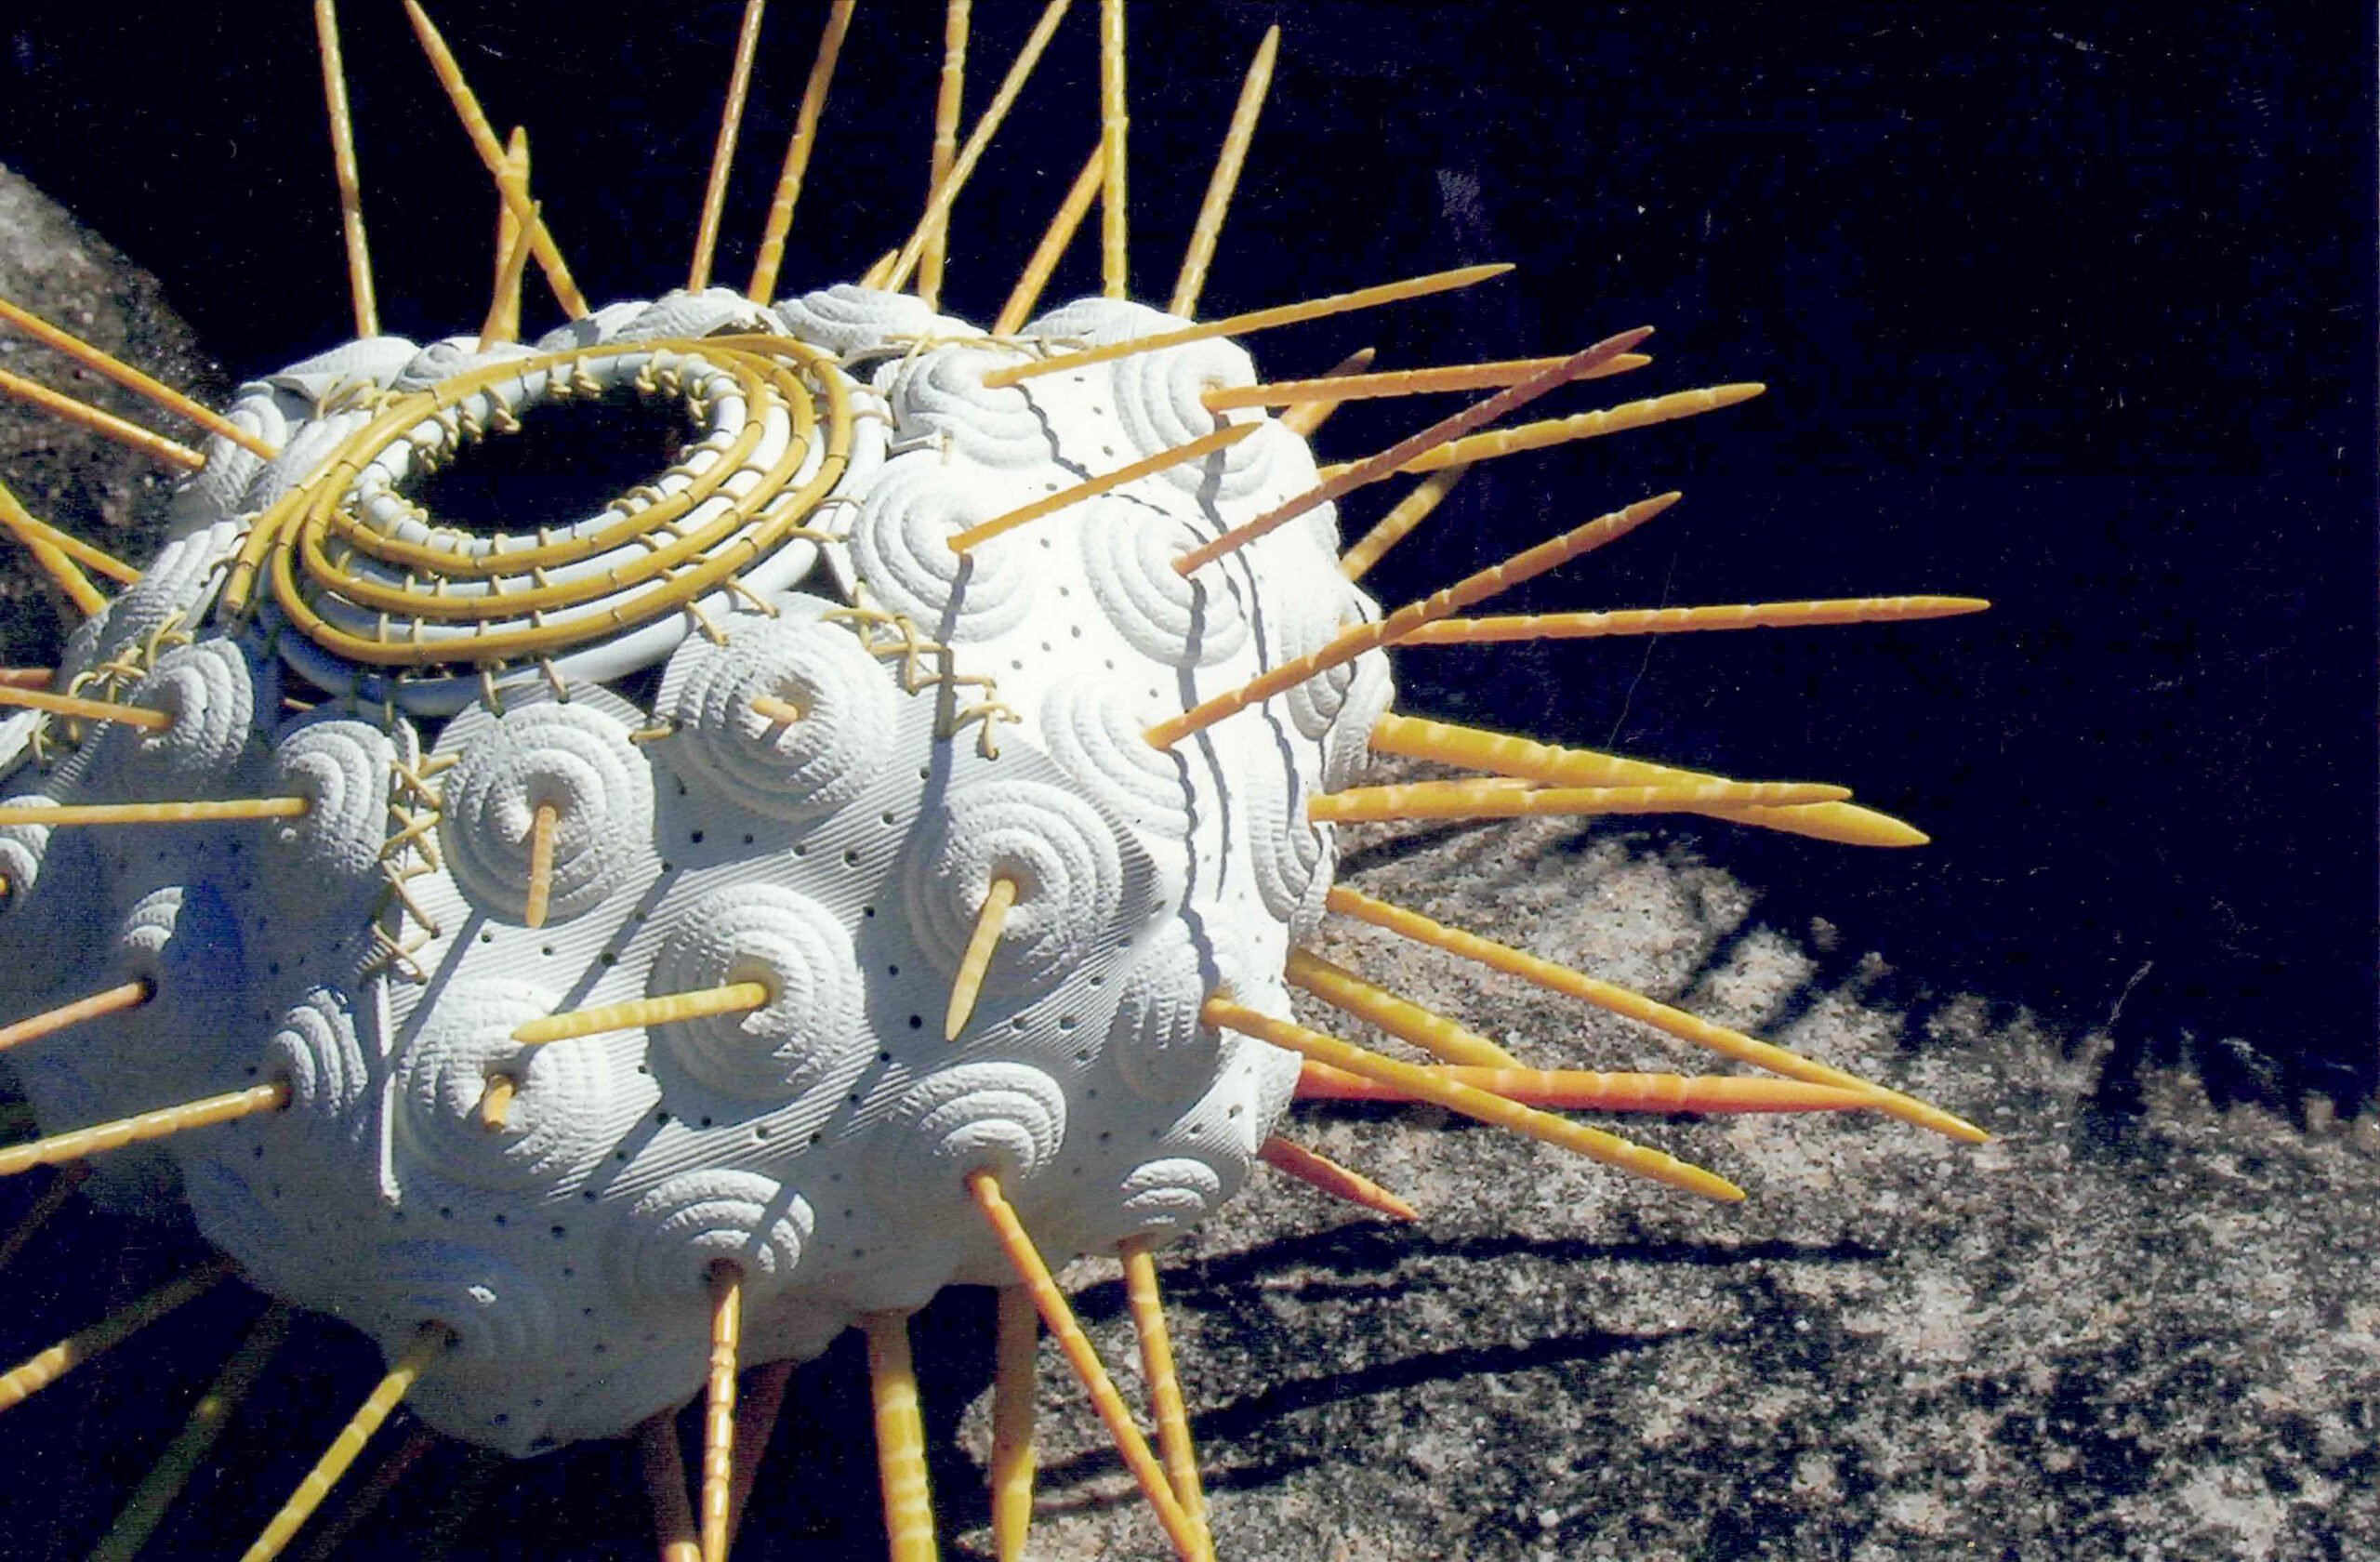 Sea Urchin from 'So Nice to be Beside the Seaside' by Libby Bloxham. This sculpture depicts a huge white sea urchin with bright yellow spikes,  assembled from found and repurposed objects including textured rubber bath mats and plastic knitting needles.